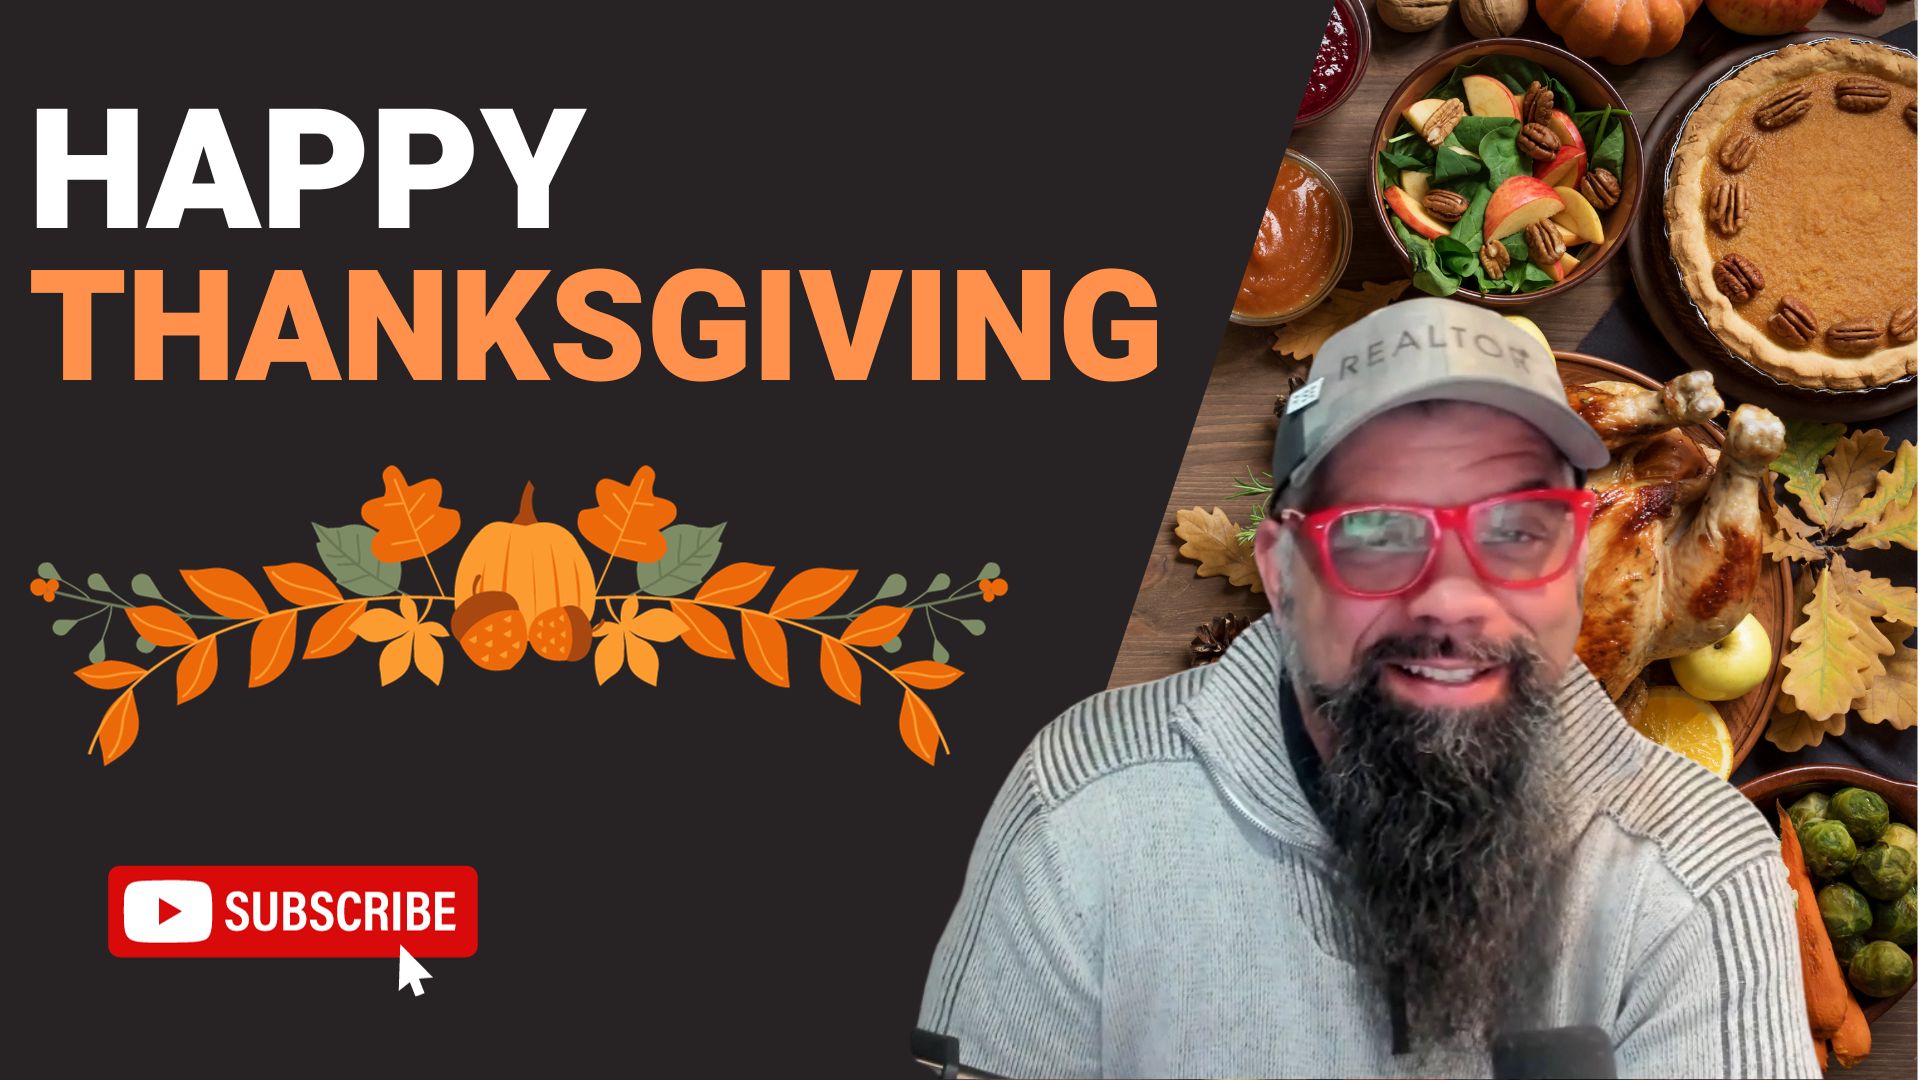 Wishing You a Happy Thanksgiving